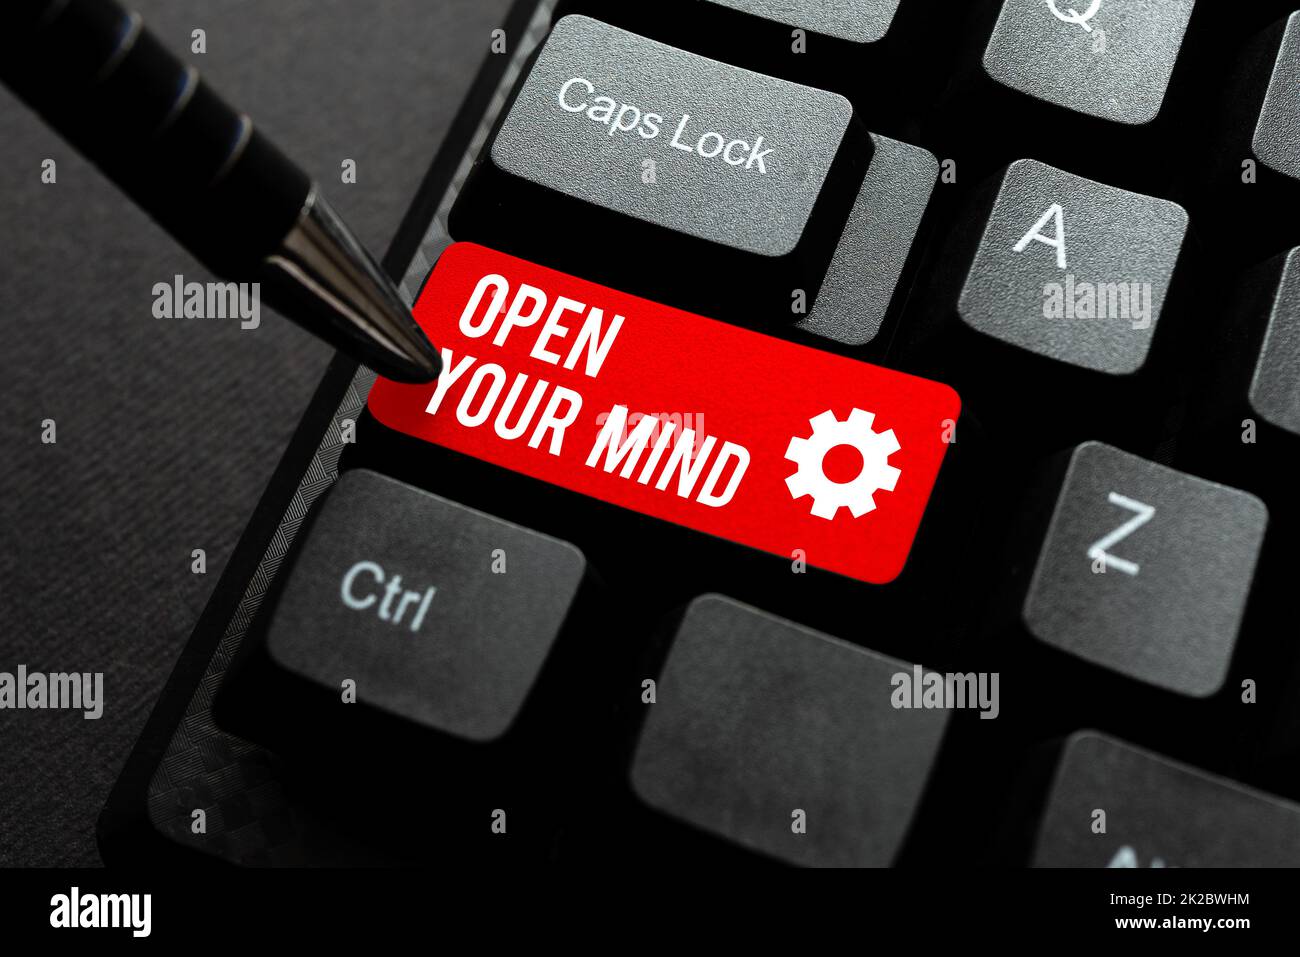 Inspiration showing sign Open Your Mind. Business idea to be able to understand different ideas or ways of thinking Typing Image Descriptions And Keywords, Entering New Internet Website Stock Photo